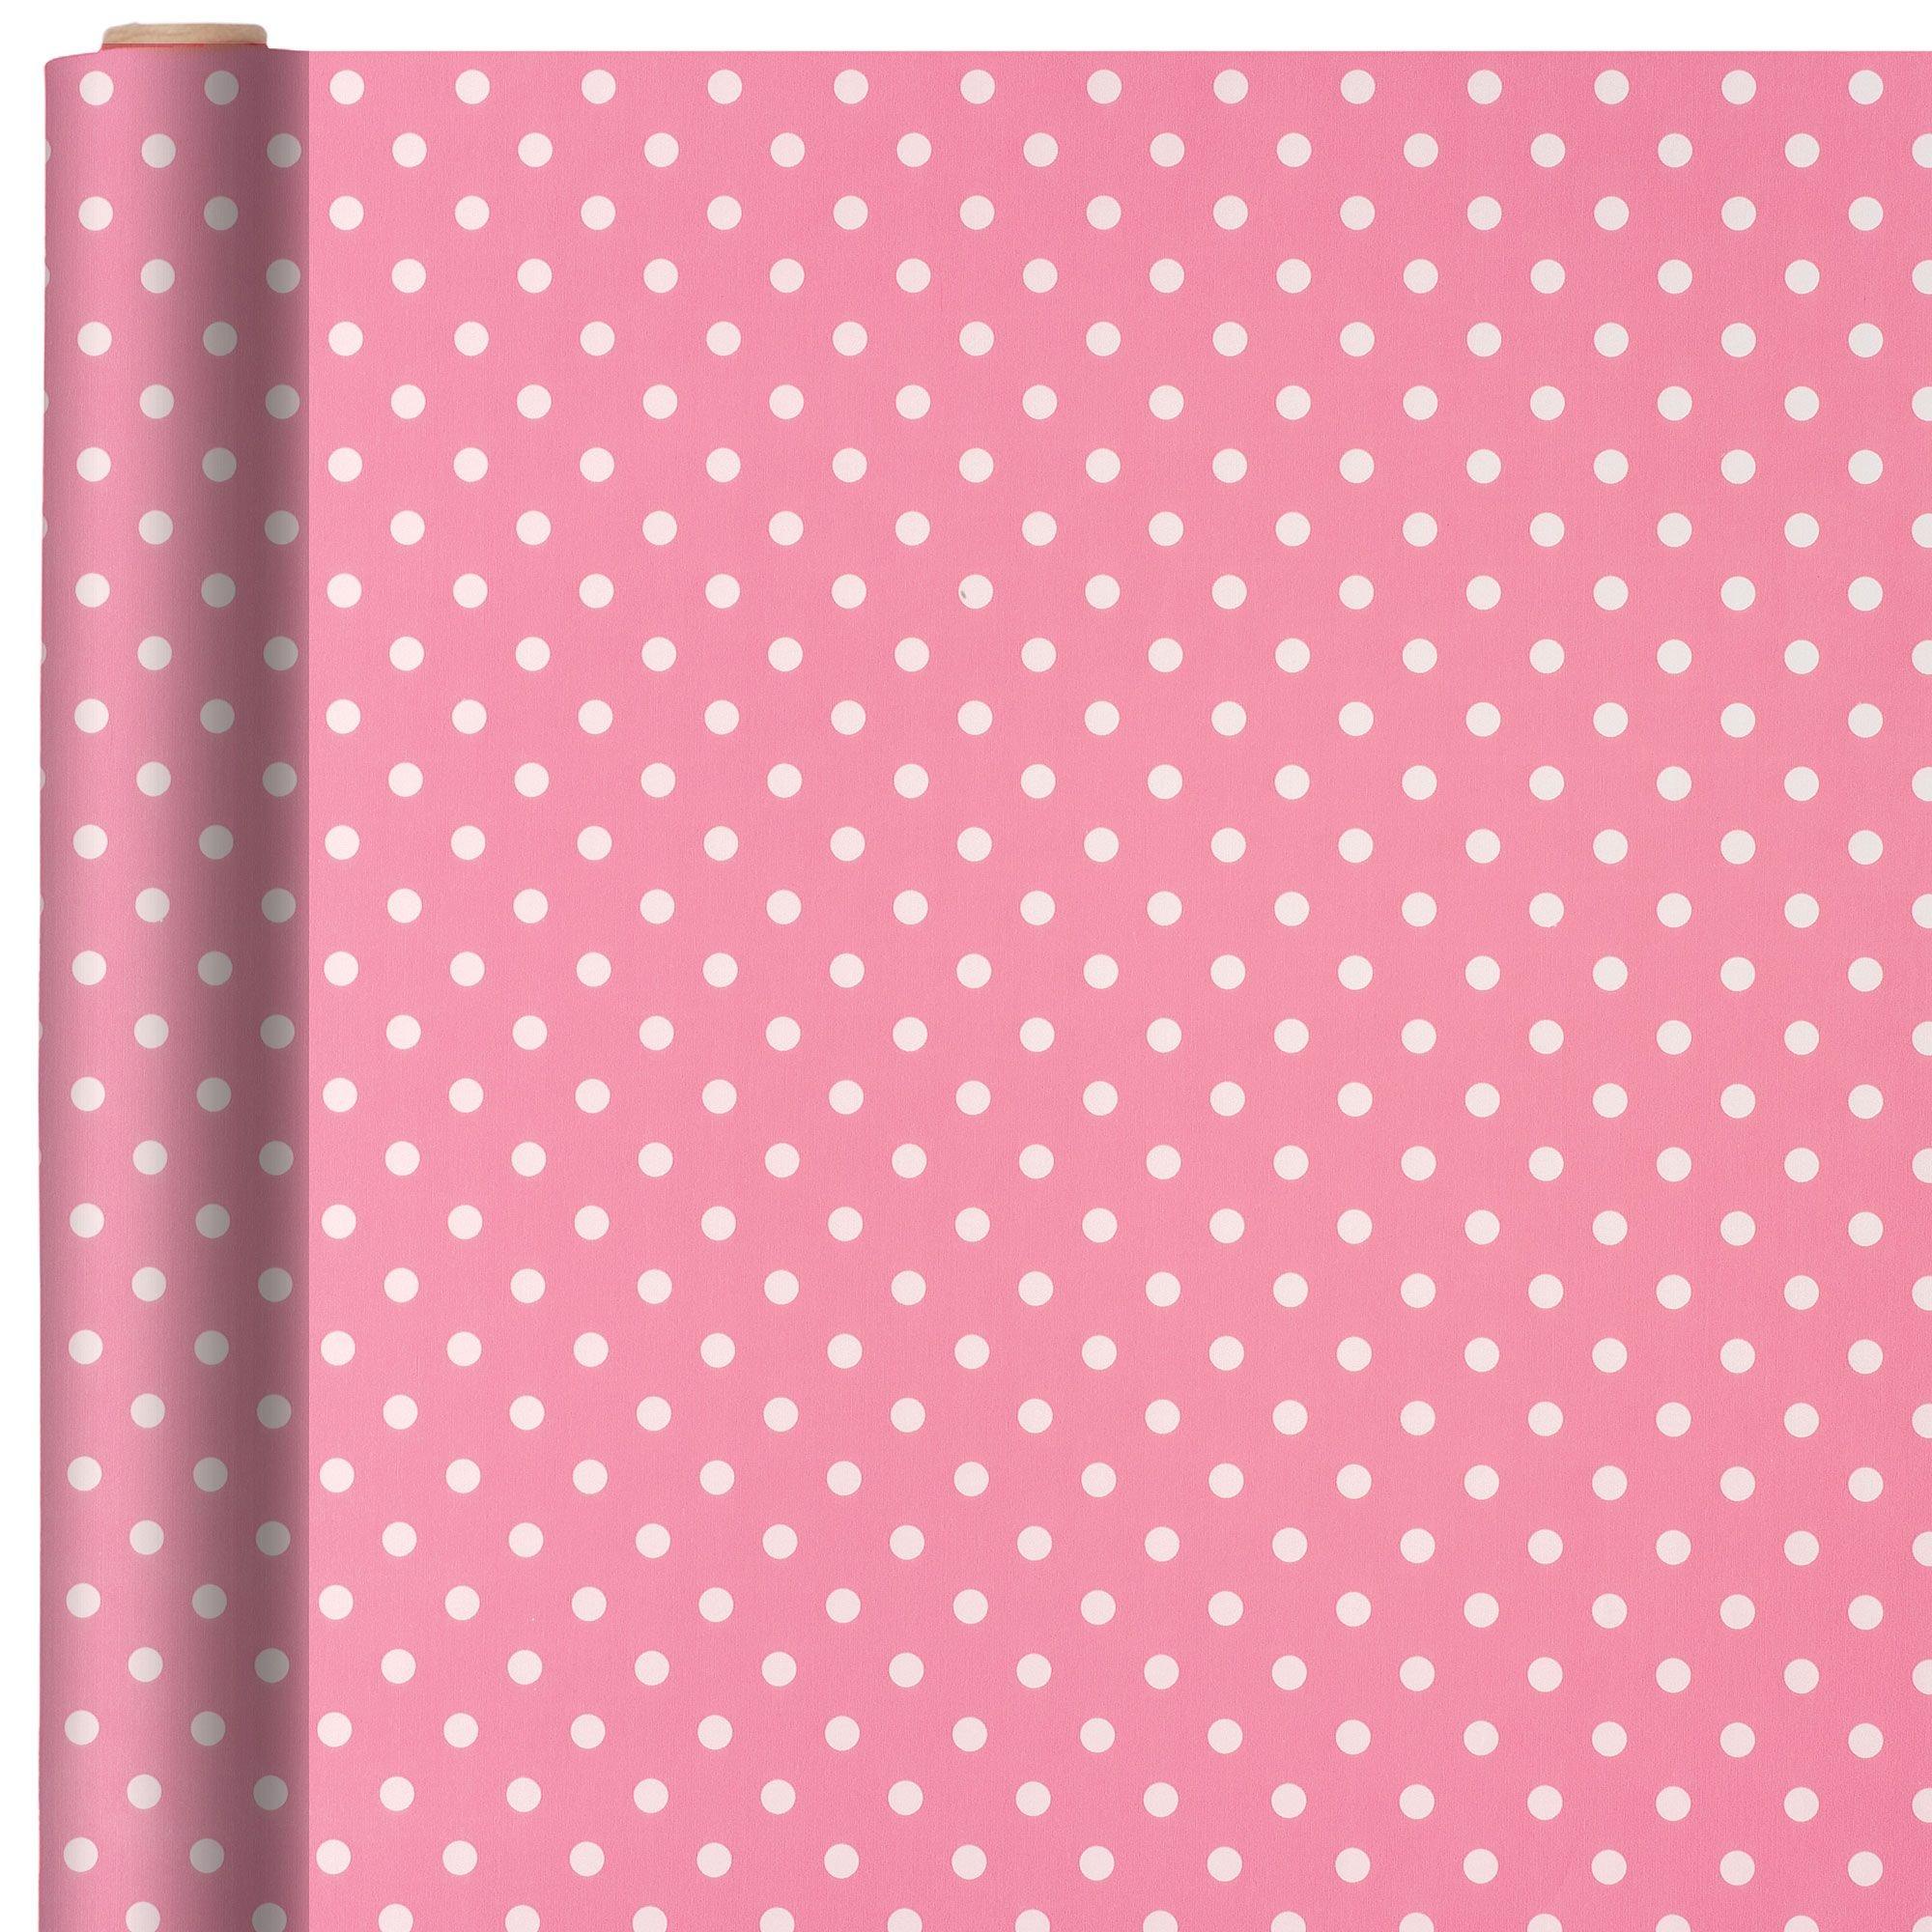 10 Sheets Polka Dot Stripe Birthday Gift Wrapping Paper Colorful Gift Wrap